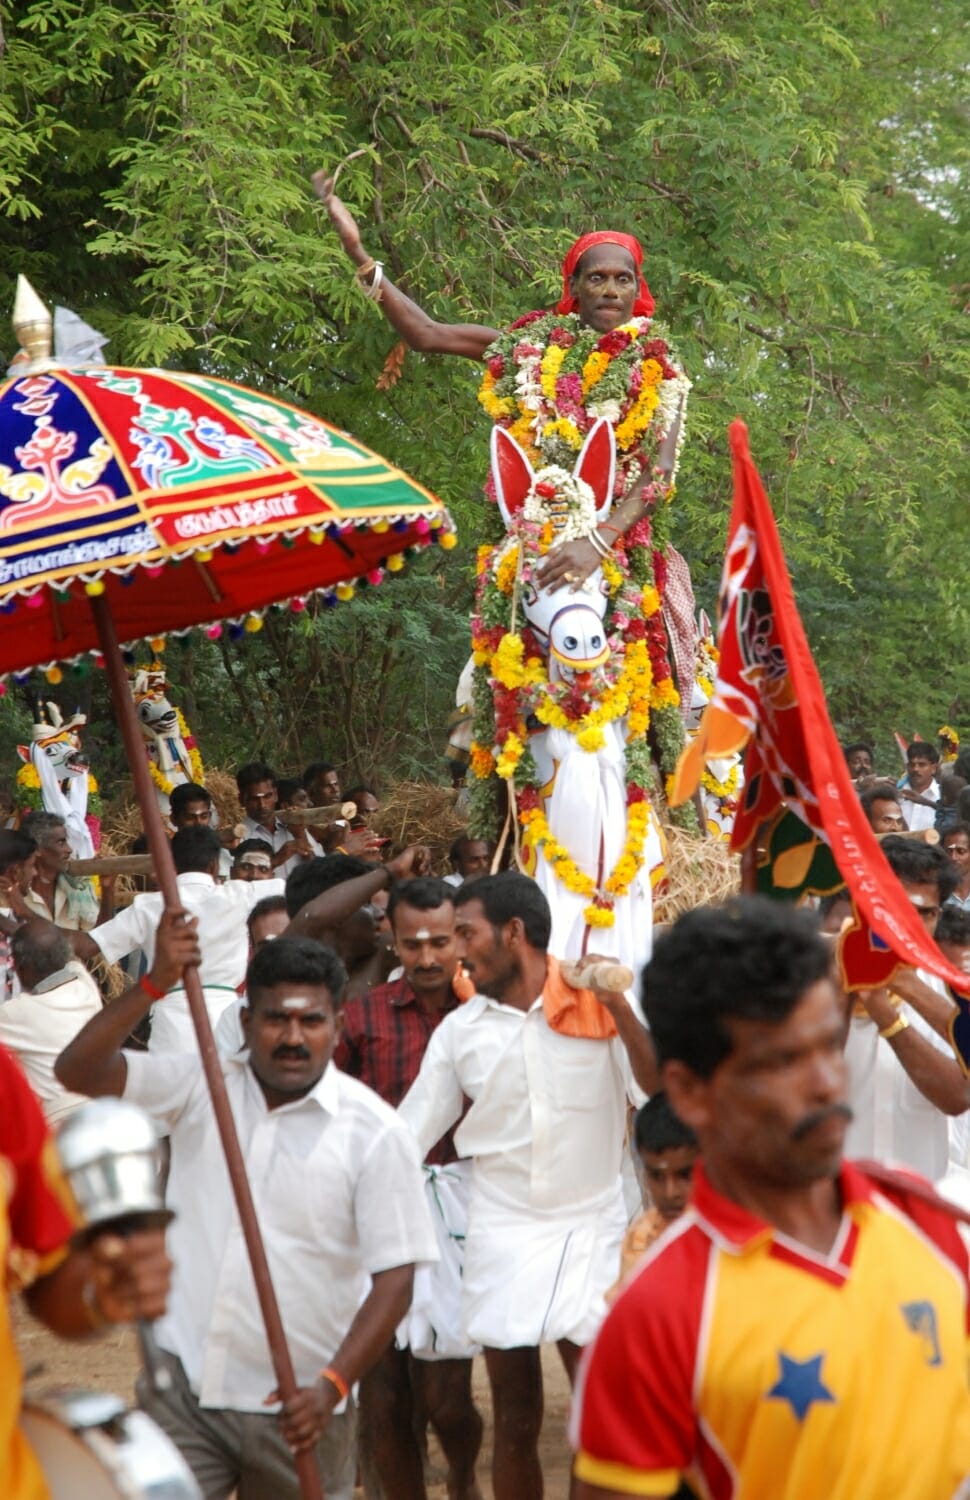 <span style="font-weight:normal;">At this festival, all of the numerous rituals are completed in one afternoon in the potters' village. After the "eye opening" ceremony, Ayyanar rides on his horse from the potters' village to the shrine. Once there, Ayyanar will dismount and continue to bless his subjects, and the offerings will find their permanent home next to the previous years' pieces.</span>